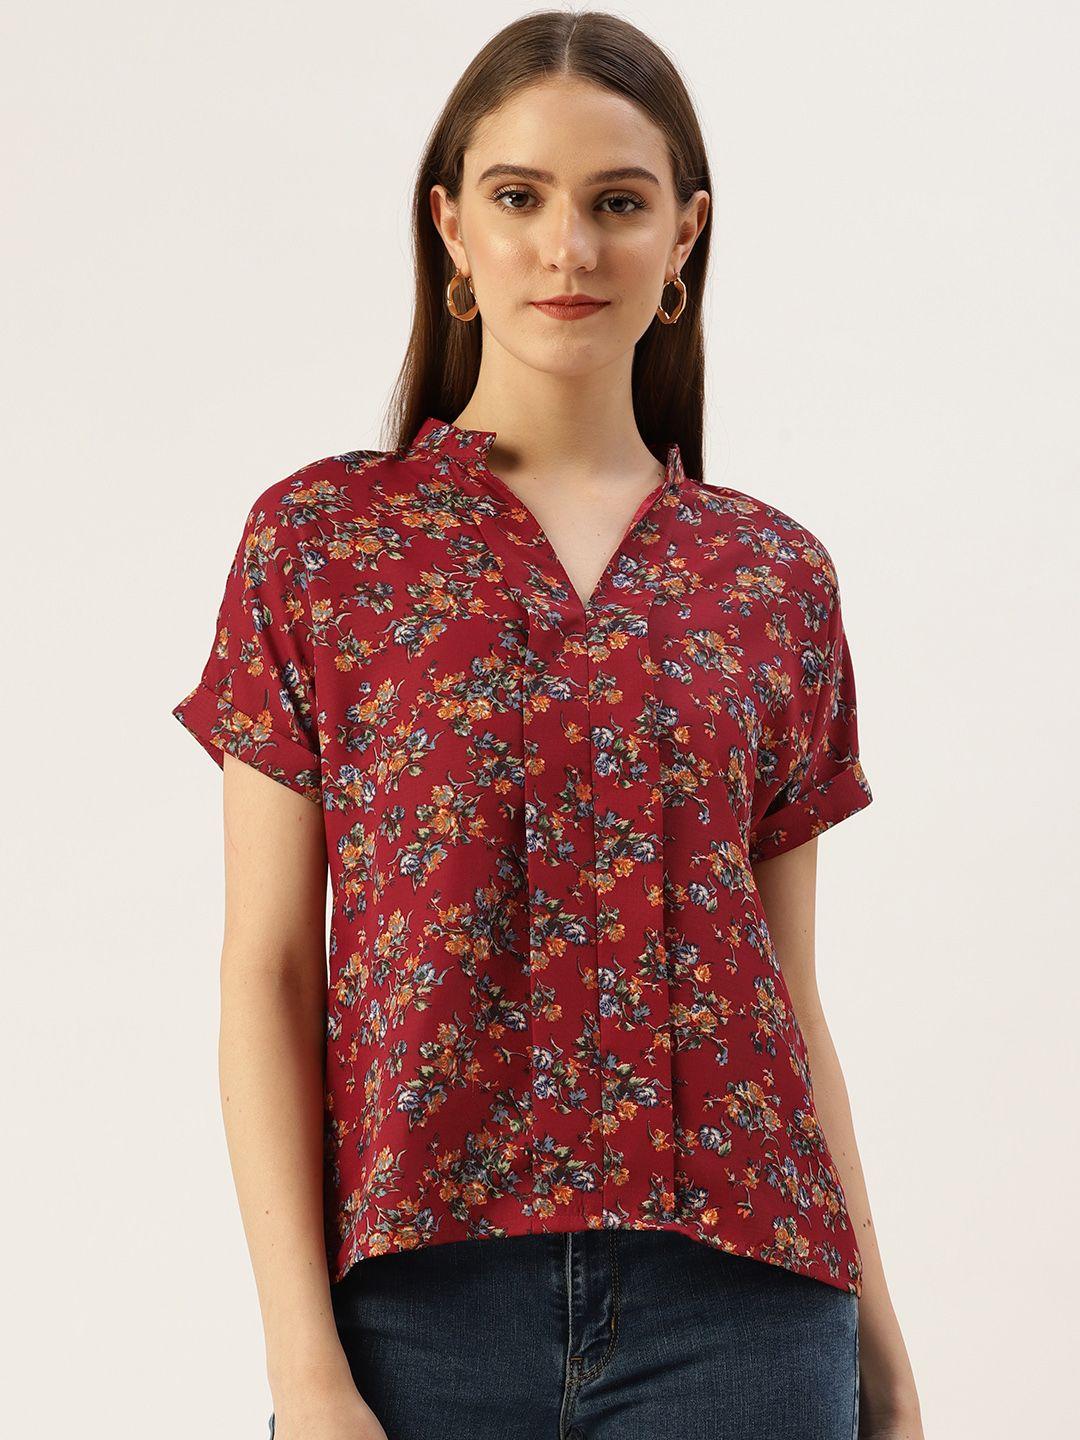 off label red floral print top